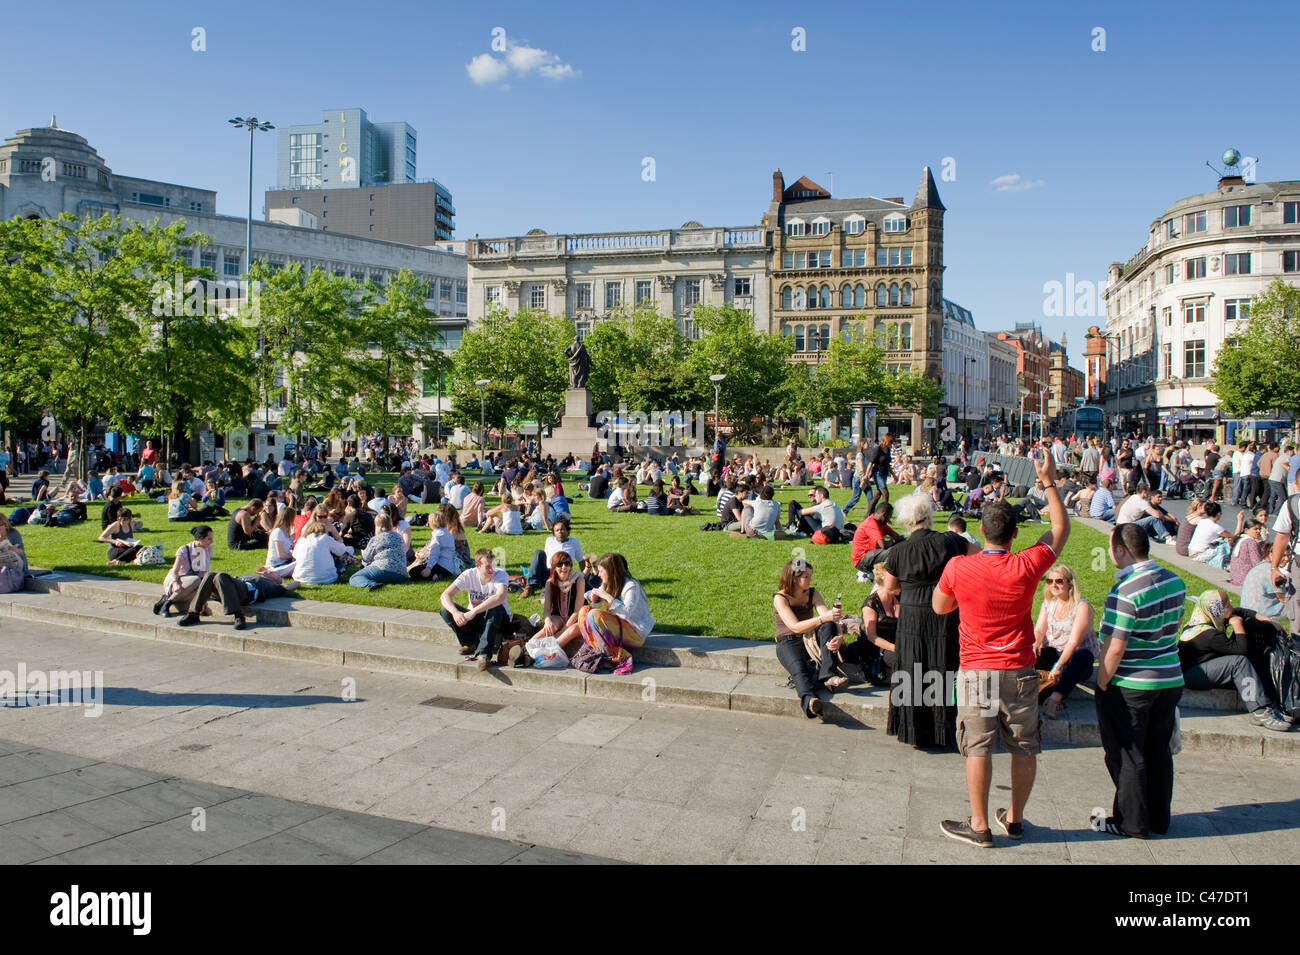 People congregate in the crowded Piccadilly Gardens, Manchester on a hot, sunny day. Stock Photo